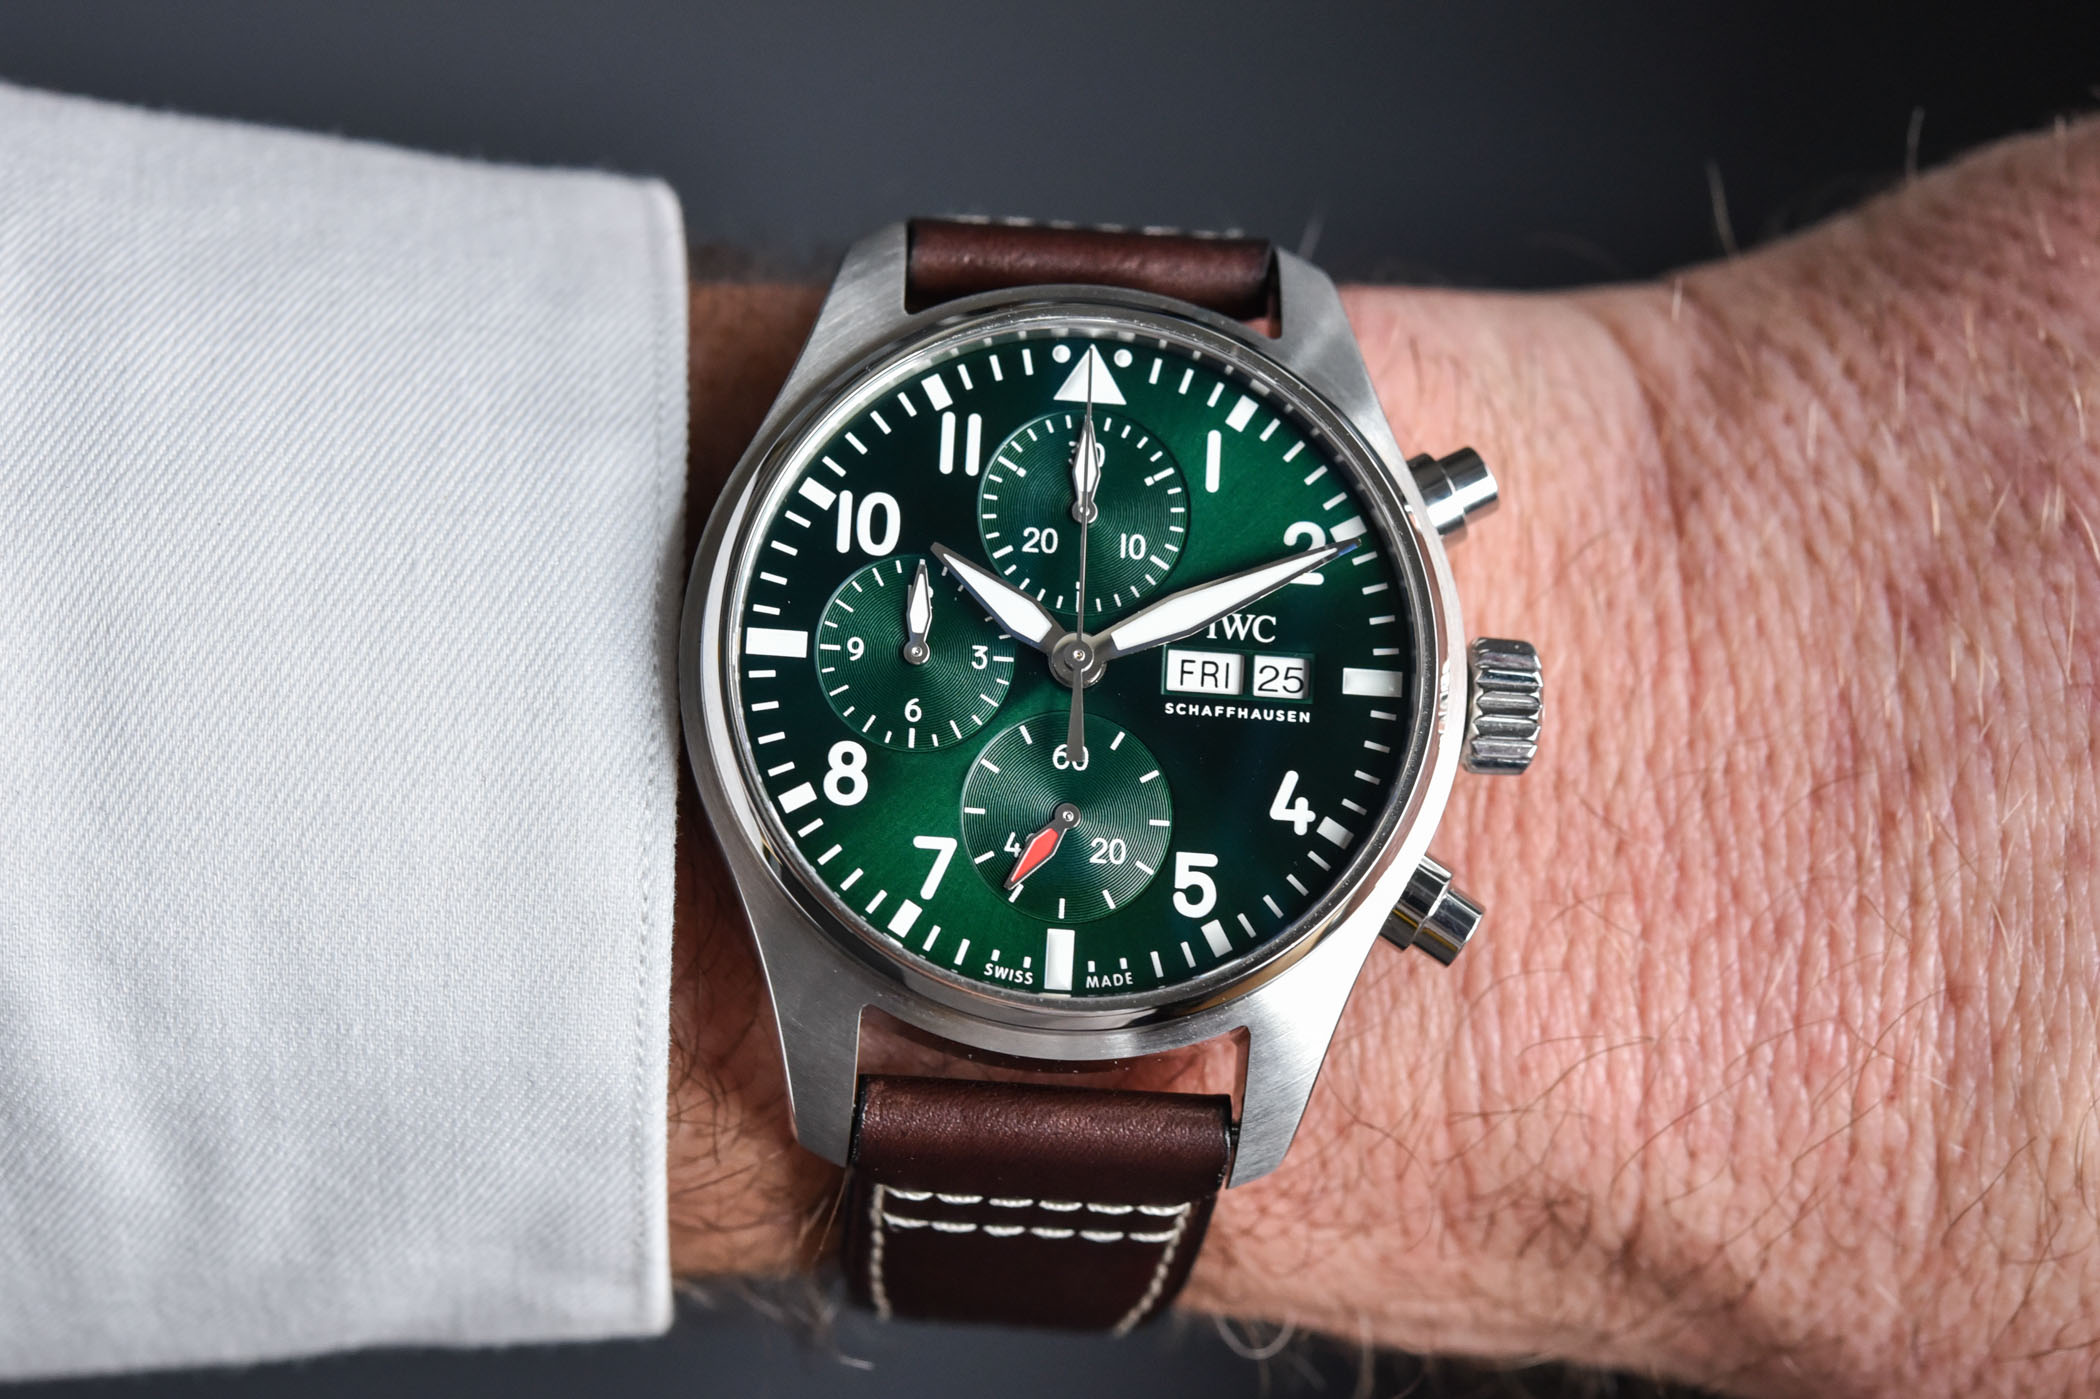 IWC Pilot's Watch Chronograph 41 - IW3881 - review video - 9